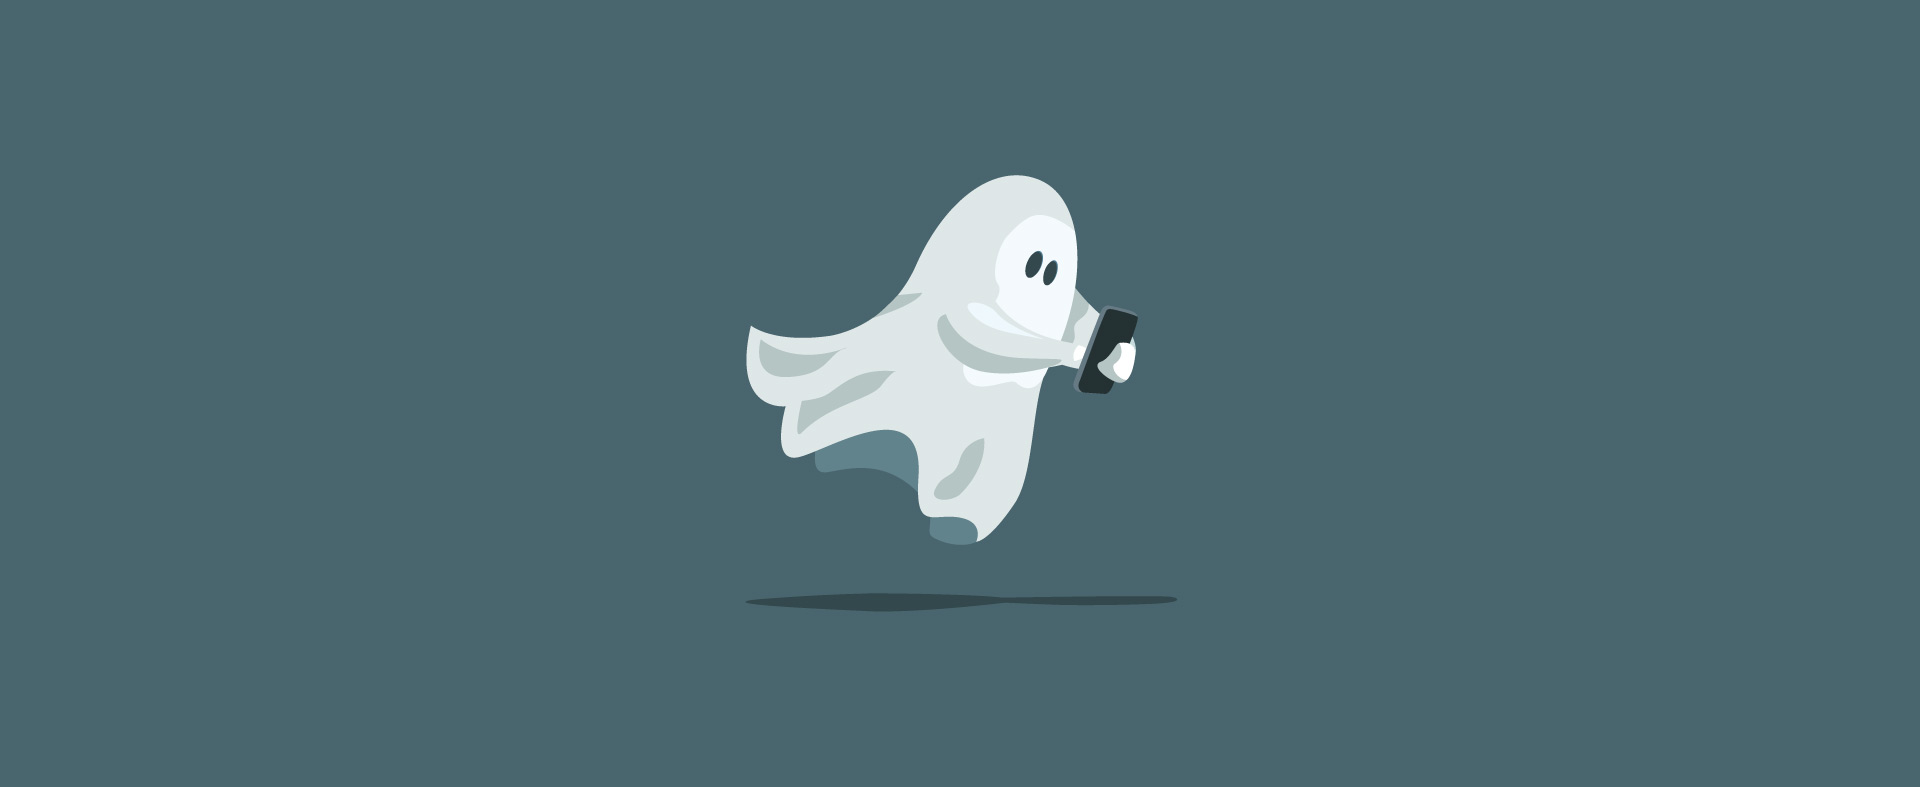 drawing of ghost using phone